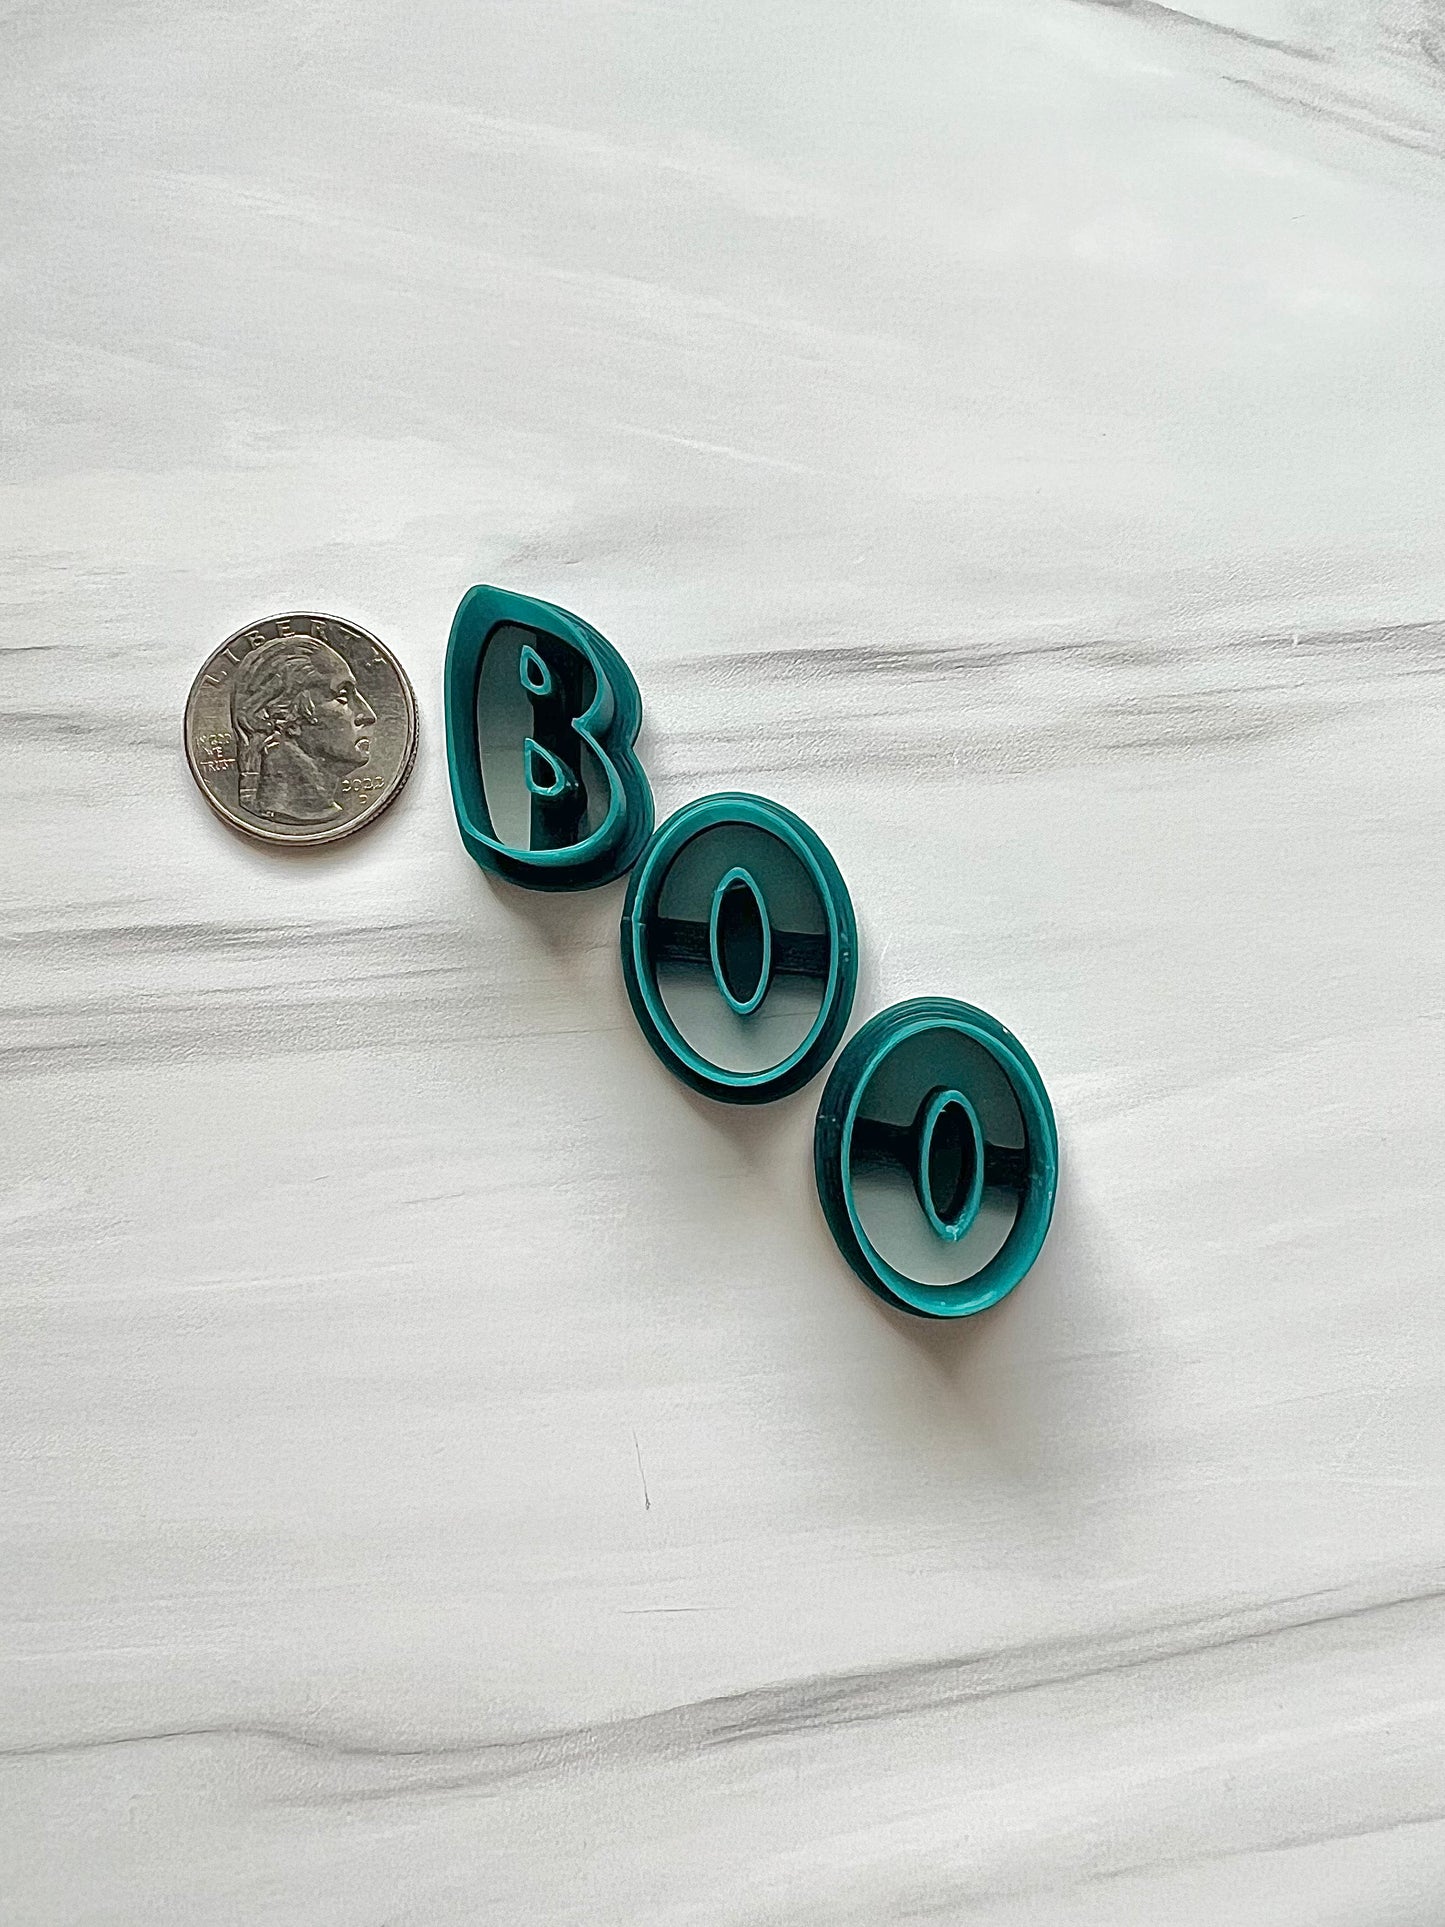 BOO Letter Cutters